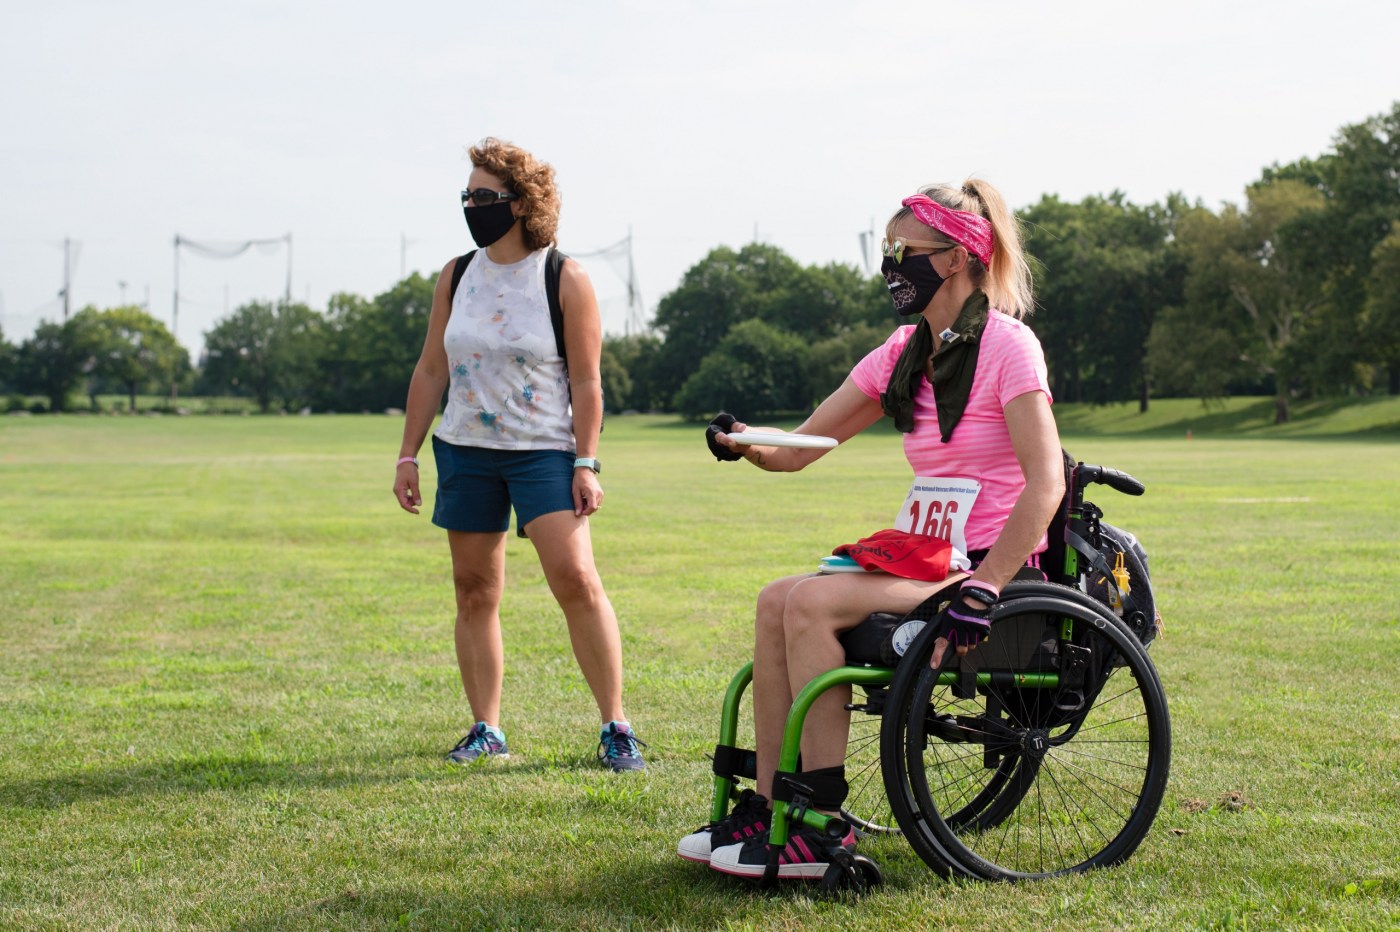 Competitor at Wheelchair Games finds motivation